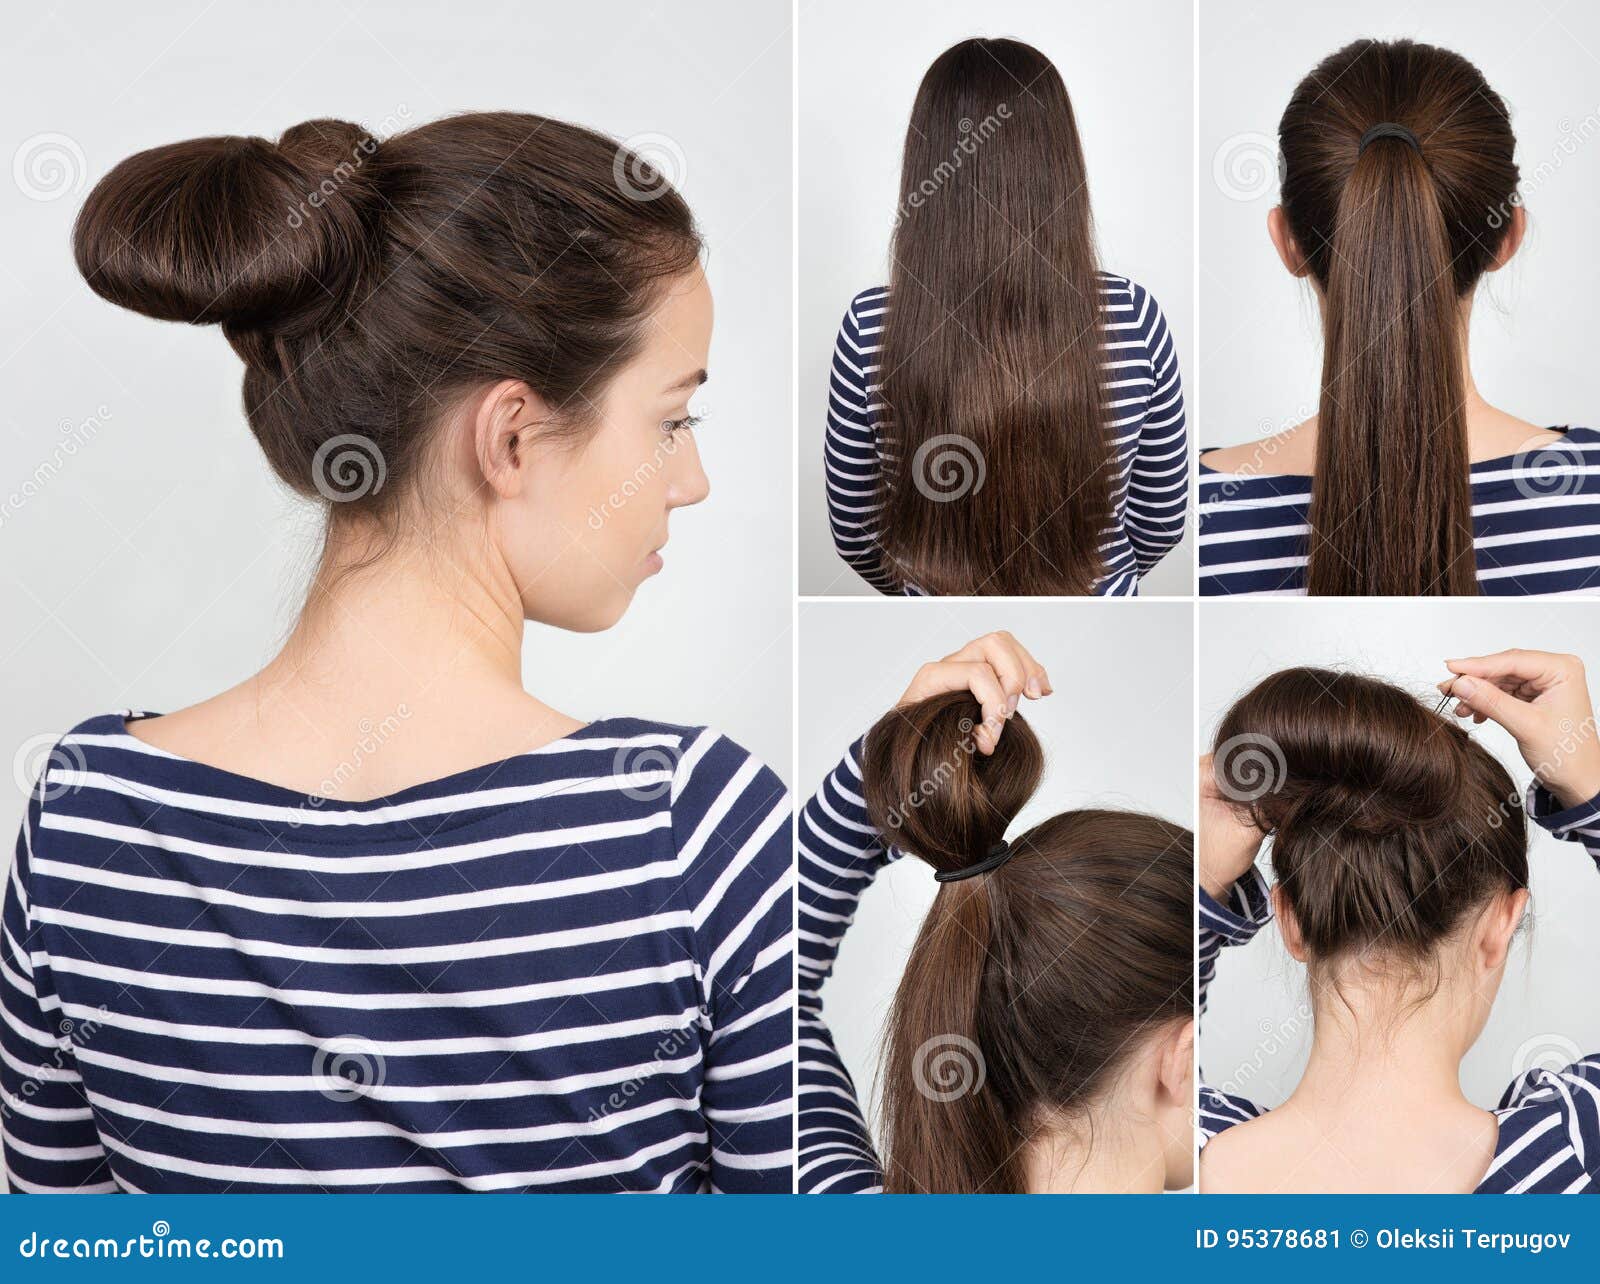 Simple Hairstyle Image & Photo (Free Trial) | Bigstock